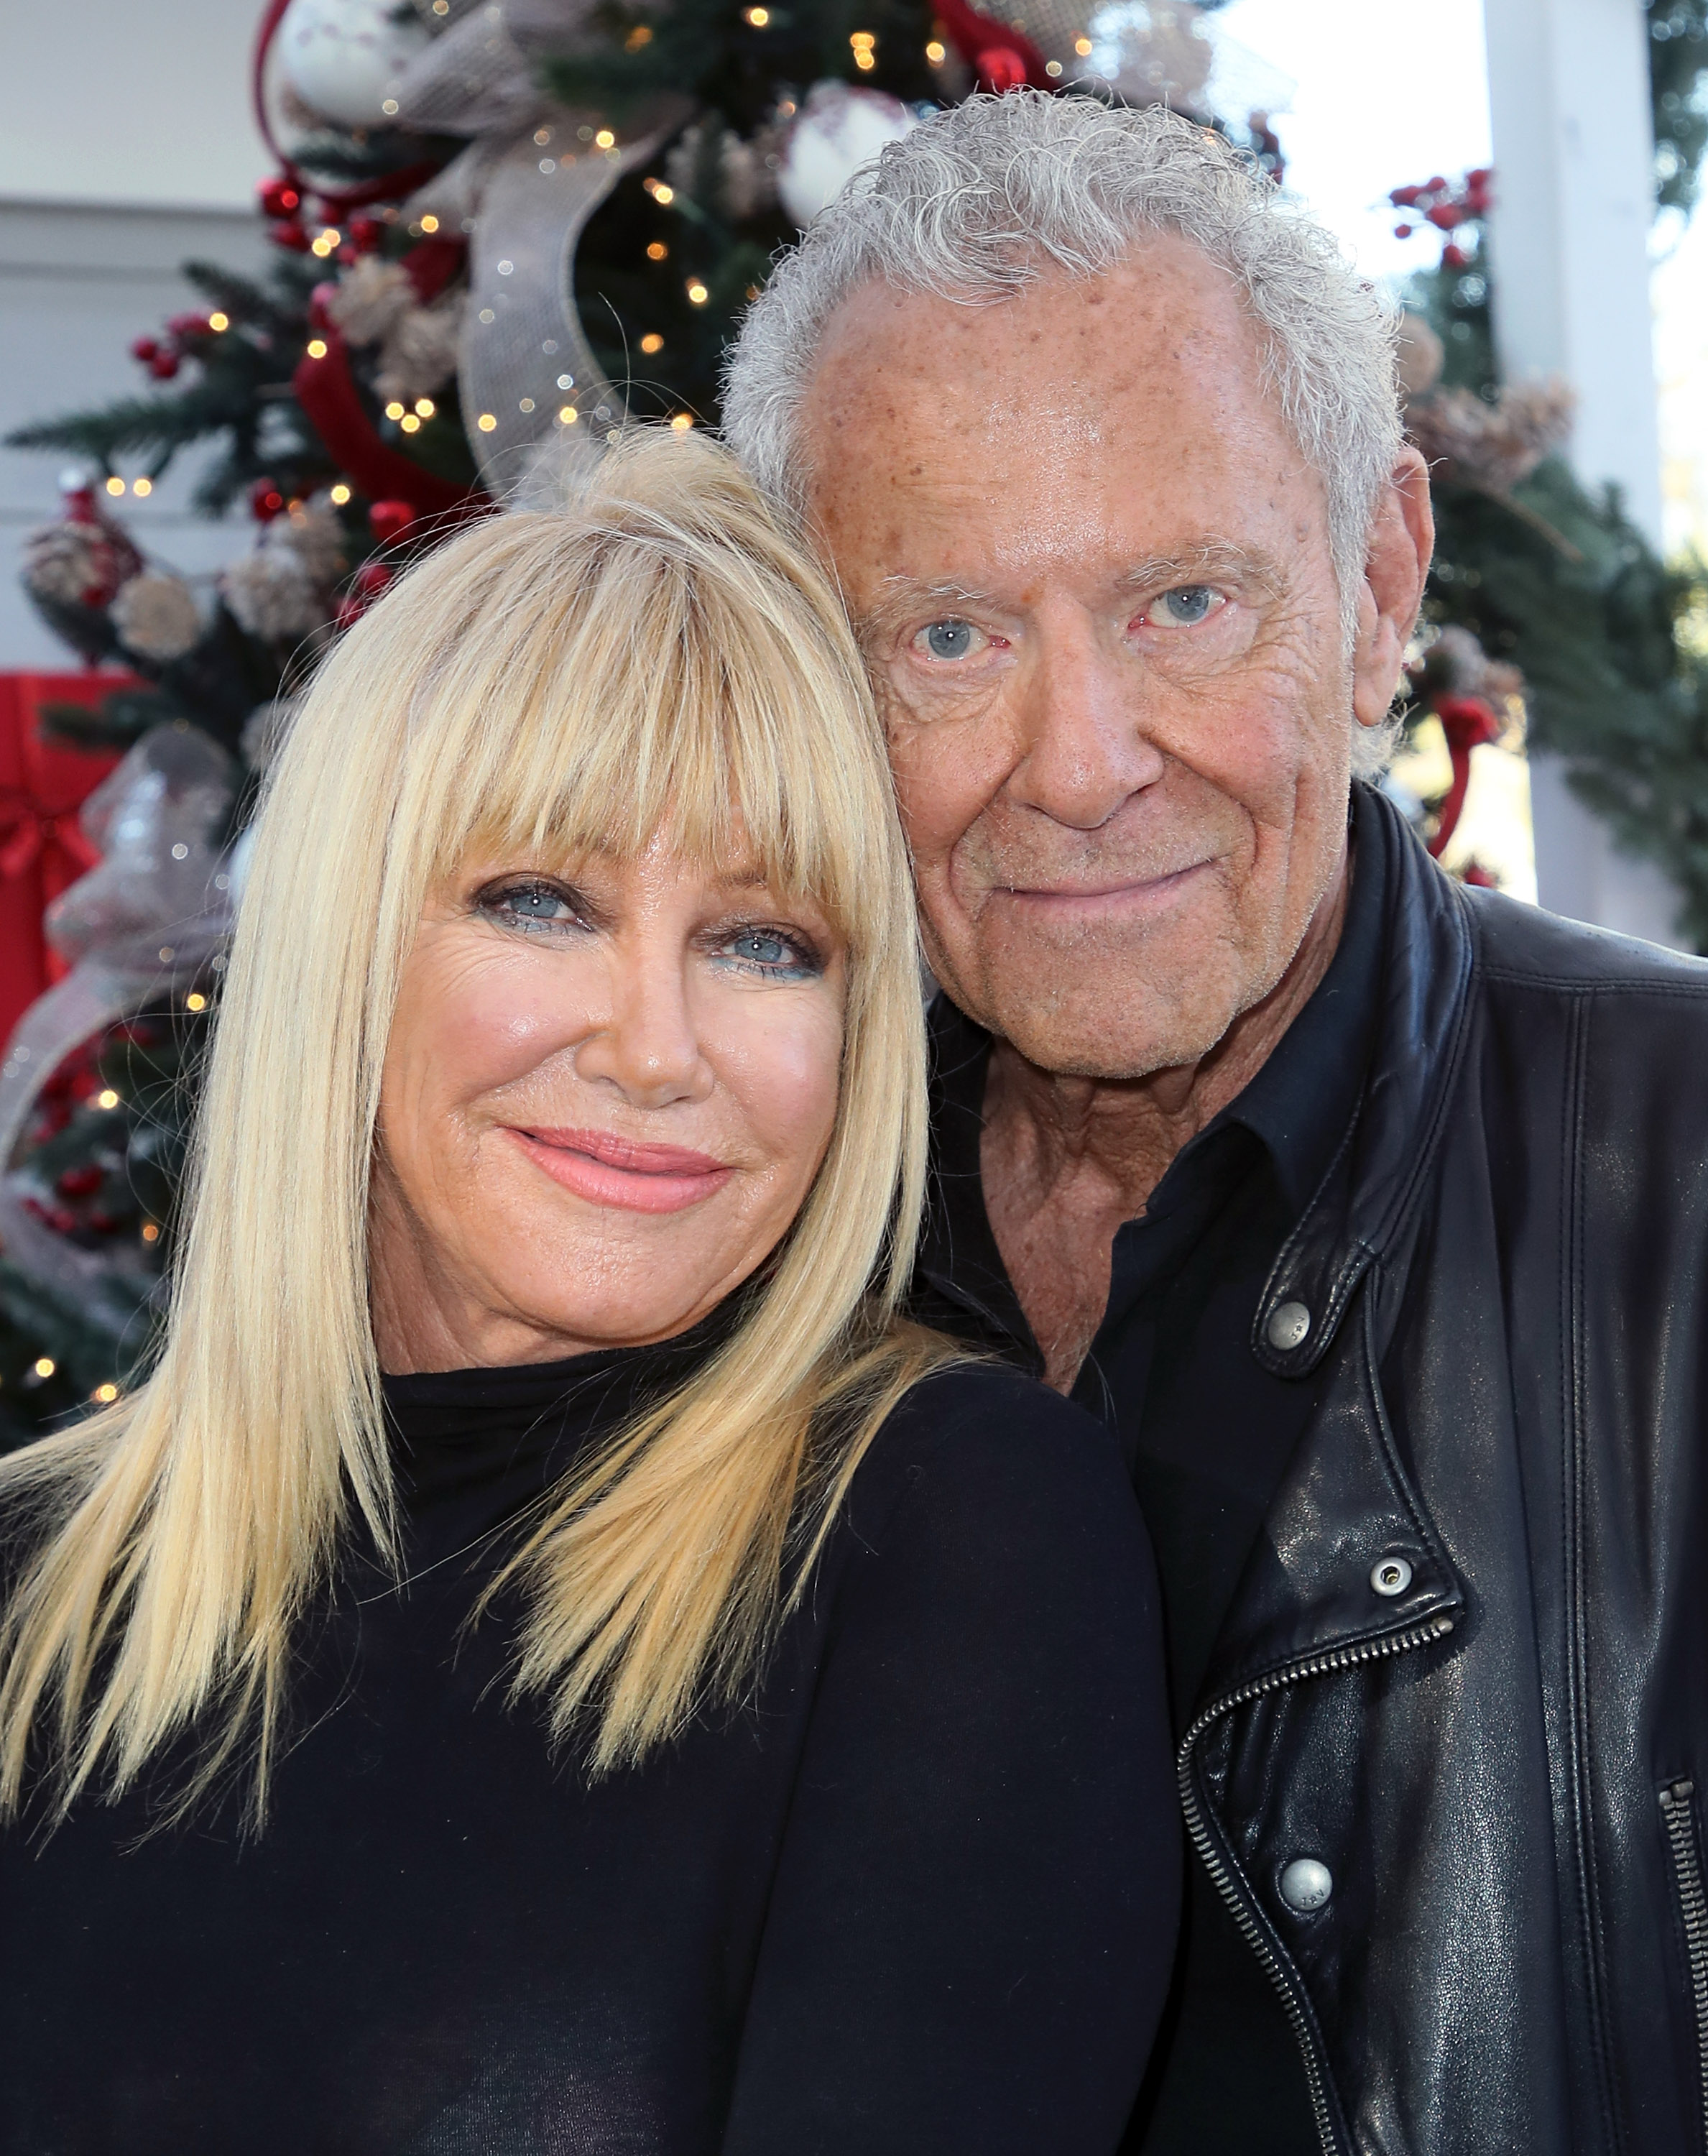 Suzanne Somers and Alan Hamel visit Hallmark's "Home & Family" at Universal Studios Hollywood on December 15, 2017 in Universal City, California. | Source: Getty Images